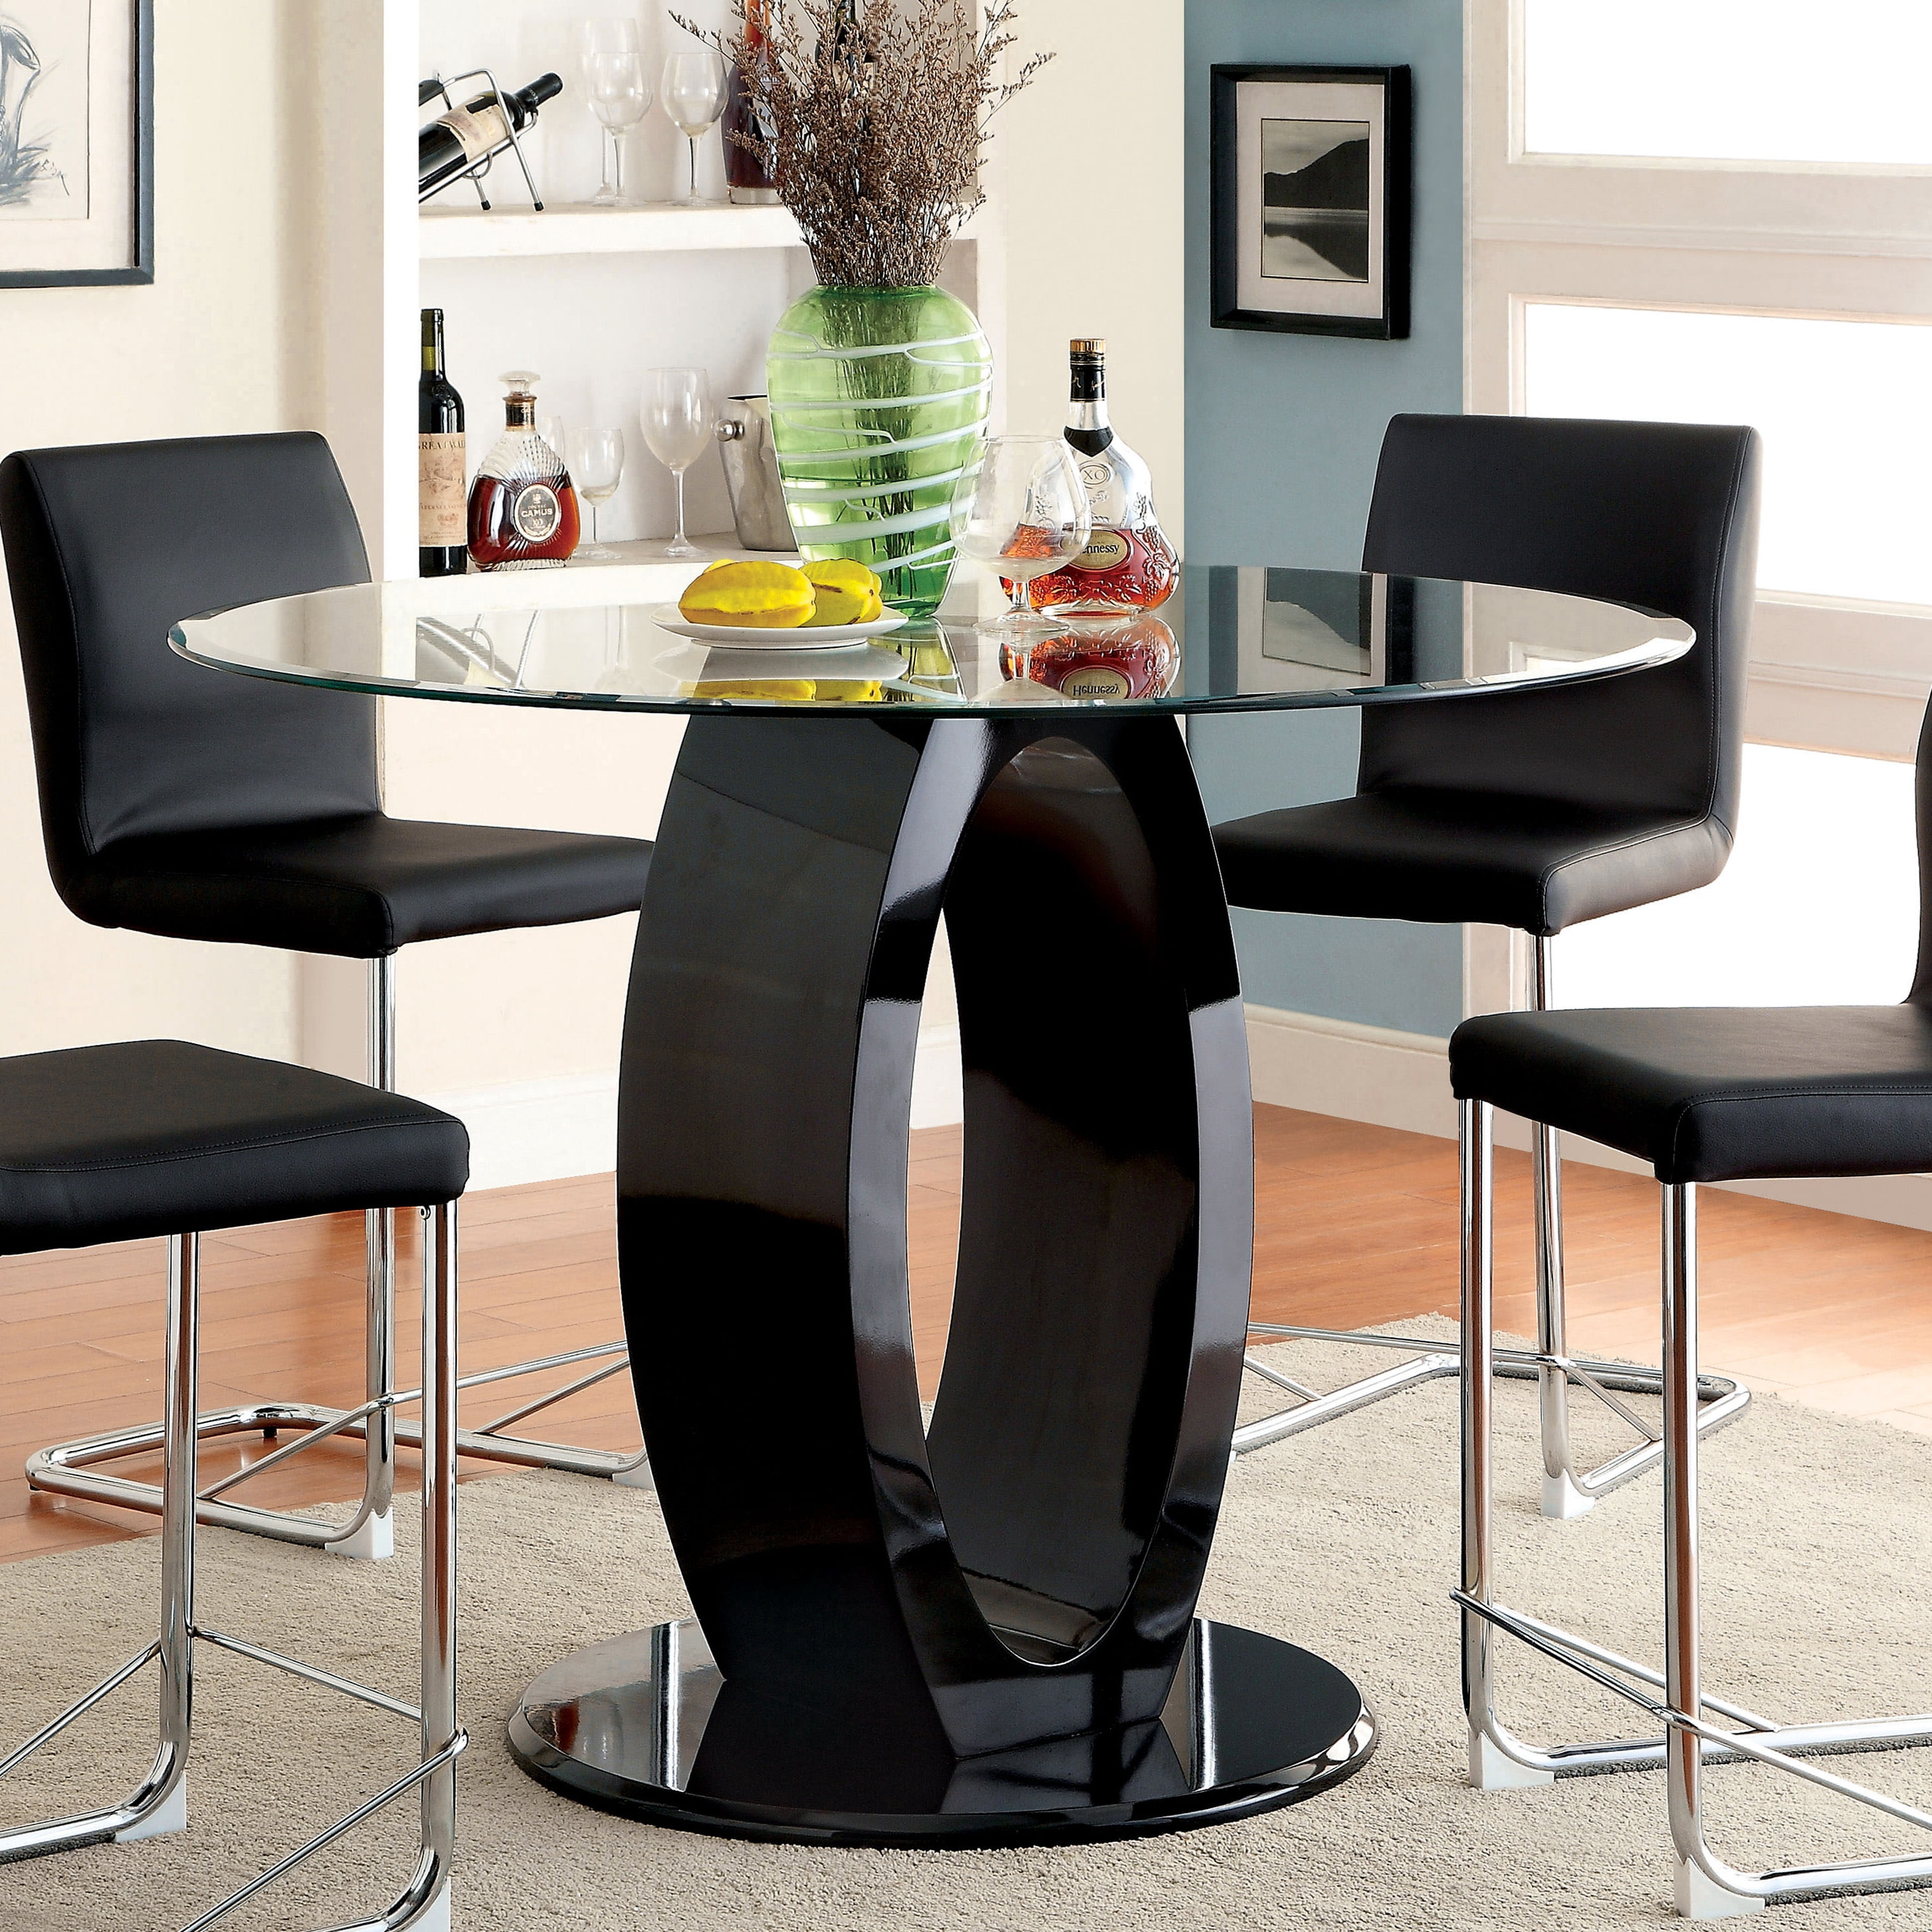 Round Dining Table Steel Frame Tempered Glass Top Home Decor Kitchen Furniture 